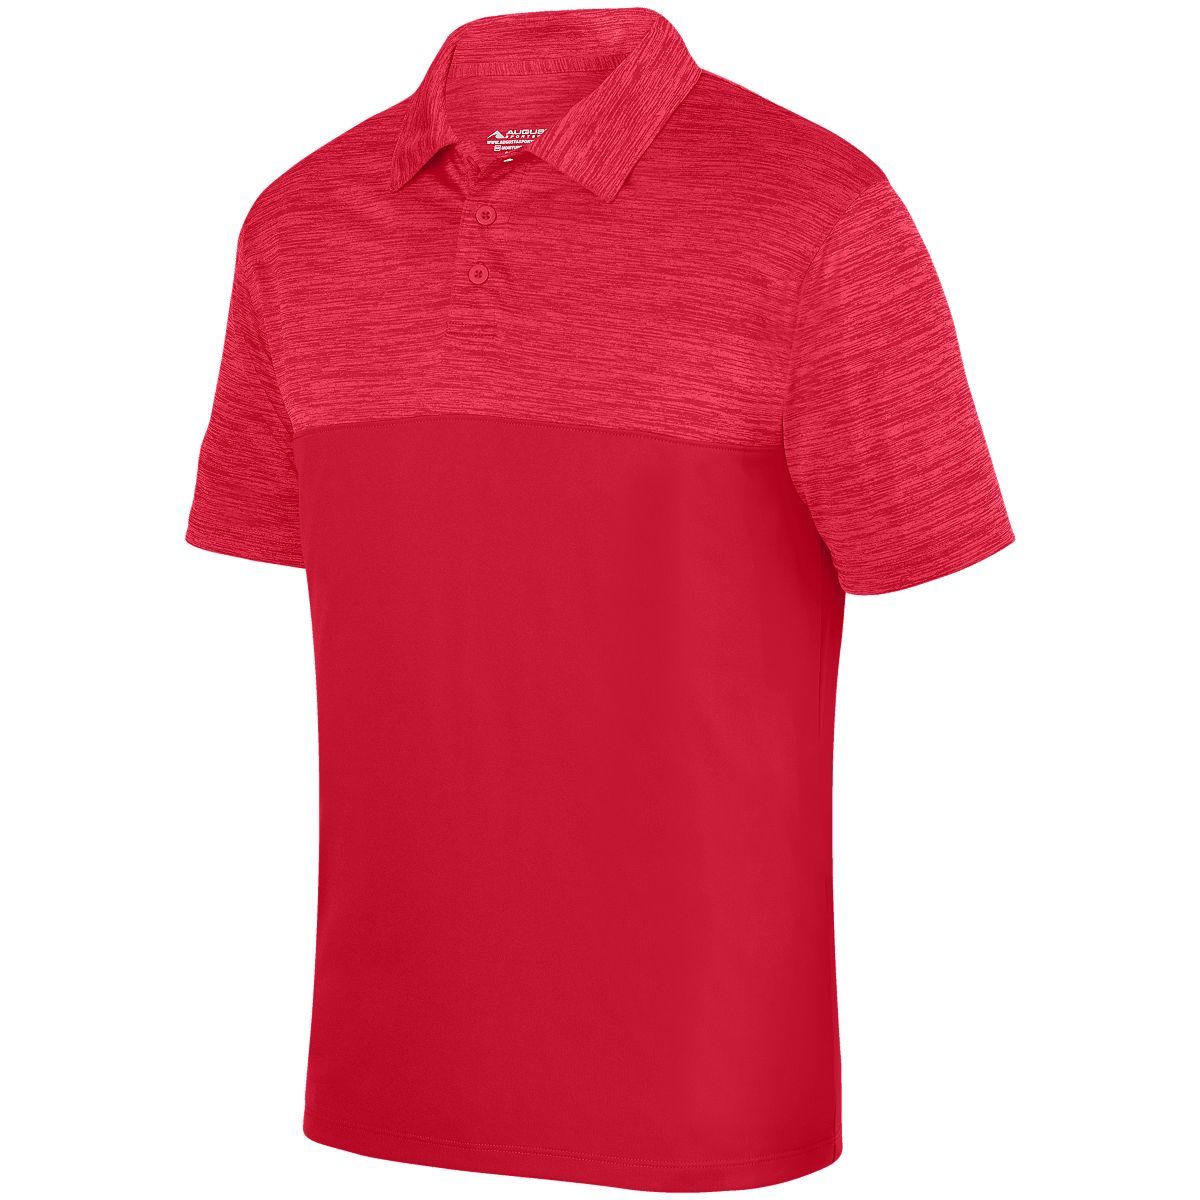 Augusta Sportswear Shadow Tonal Heather Polo in Red  -Part of the Adult, Adult-Polos, Polos, Augusta-Products, Shirts, Tonal-Fleece-Collection product lines at KanaleyCreations.com